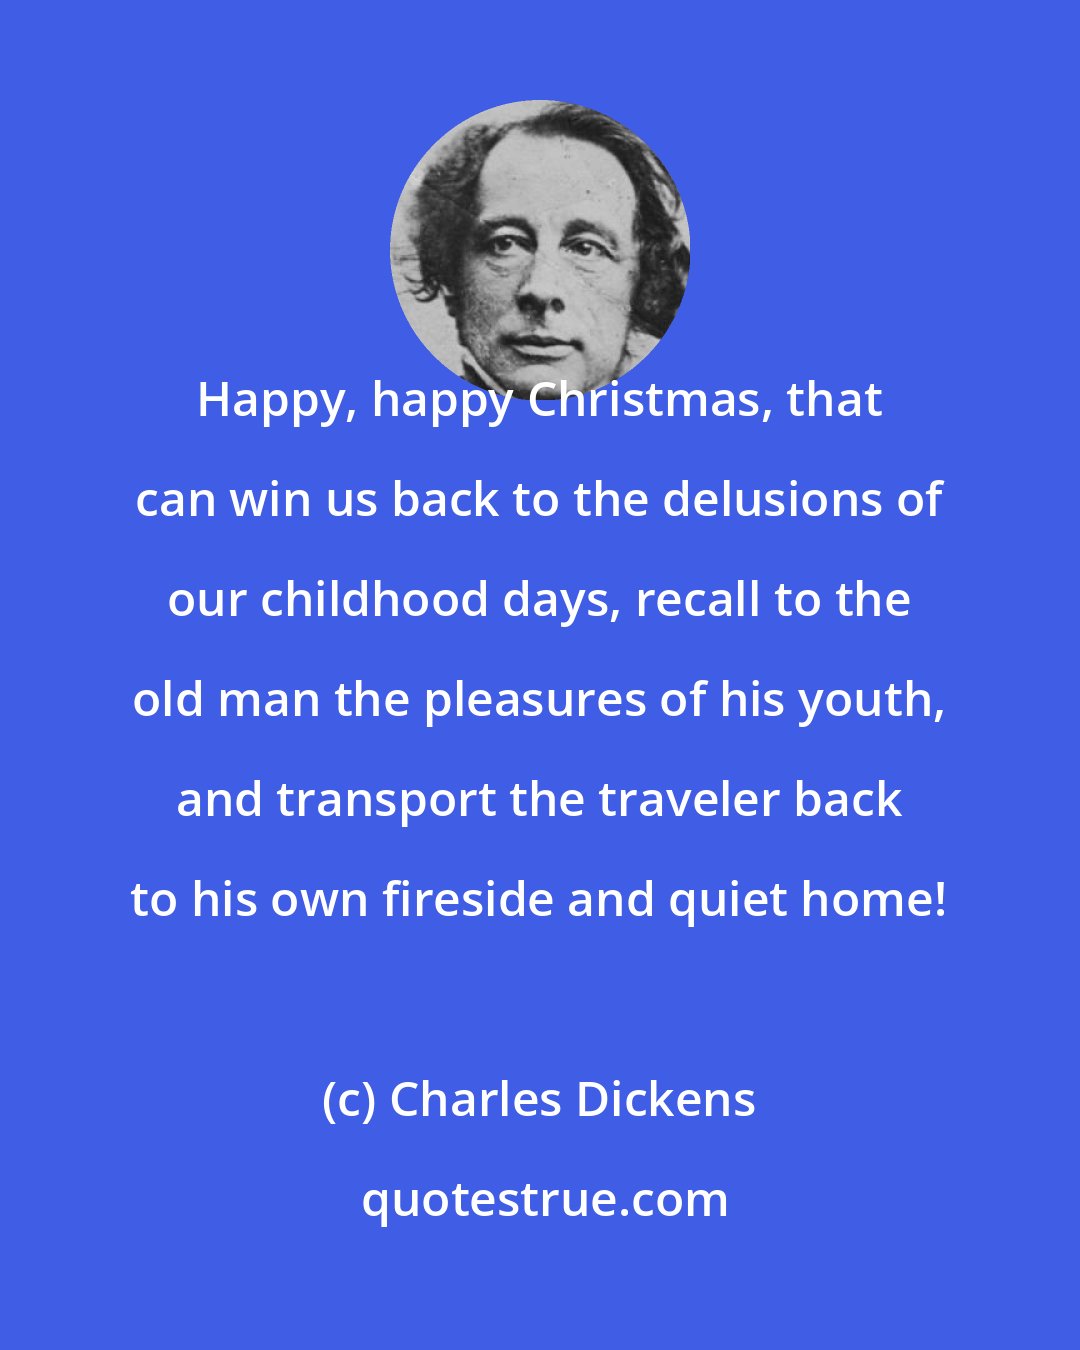 Charles Dickens: Happy, happy Christmas, that can win us back to the delusions of our childhood days, recall to the old man the pleasures of his youth, and transport the traveler back to his own fireside and quiet home!